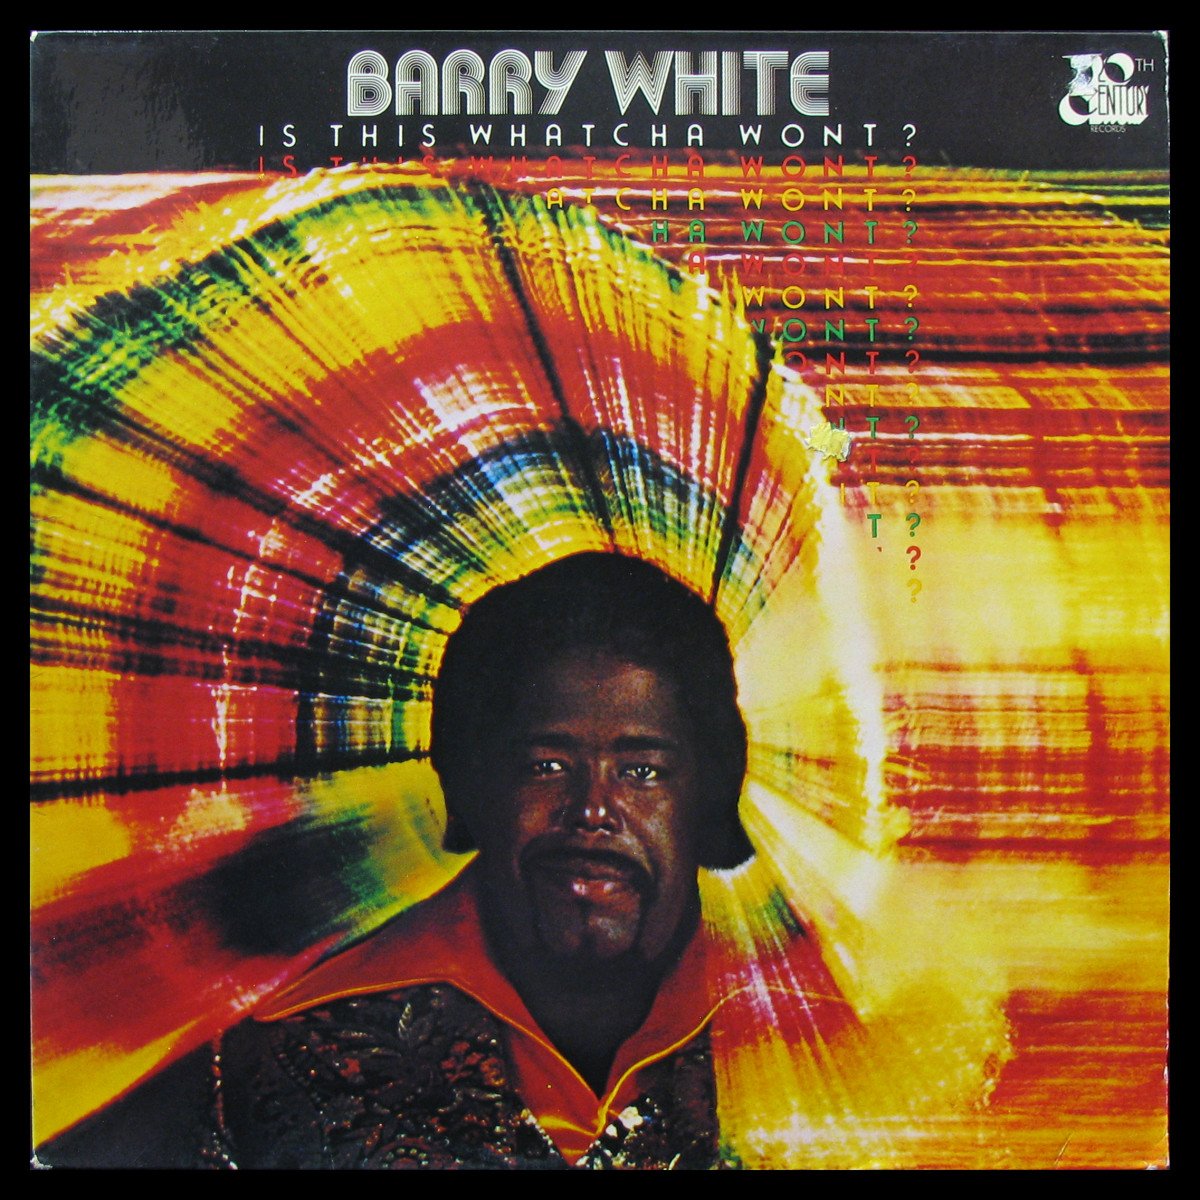 LP Barry White — Is This Whatcha Wont? фото